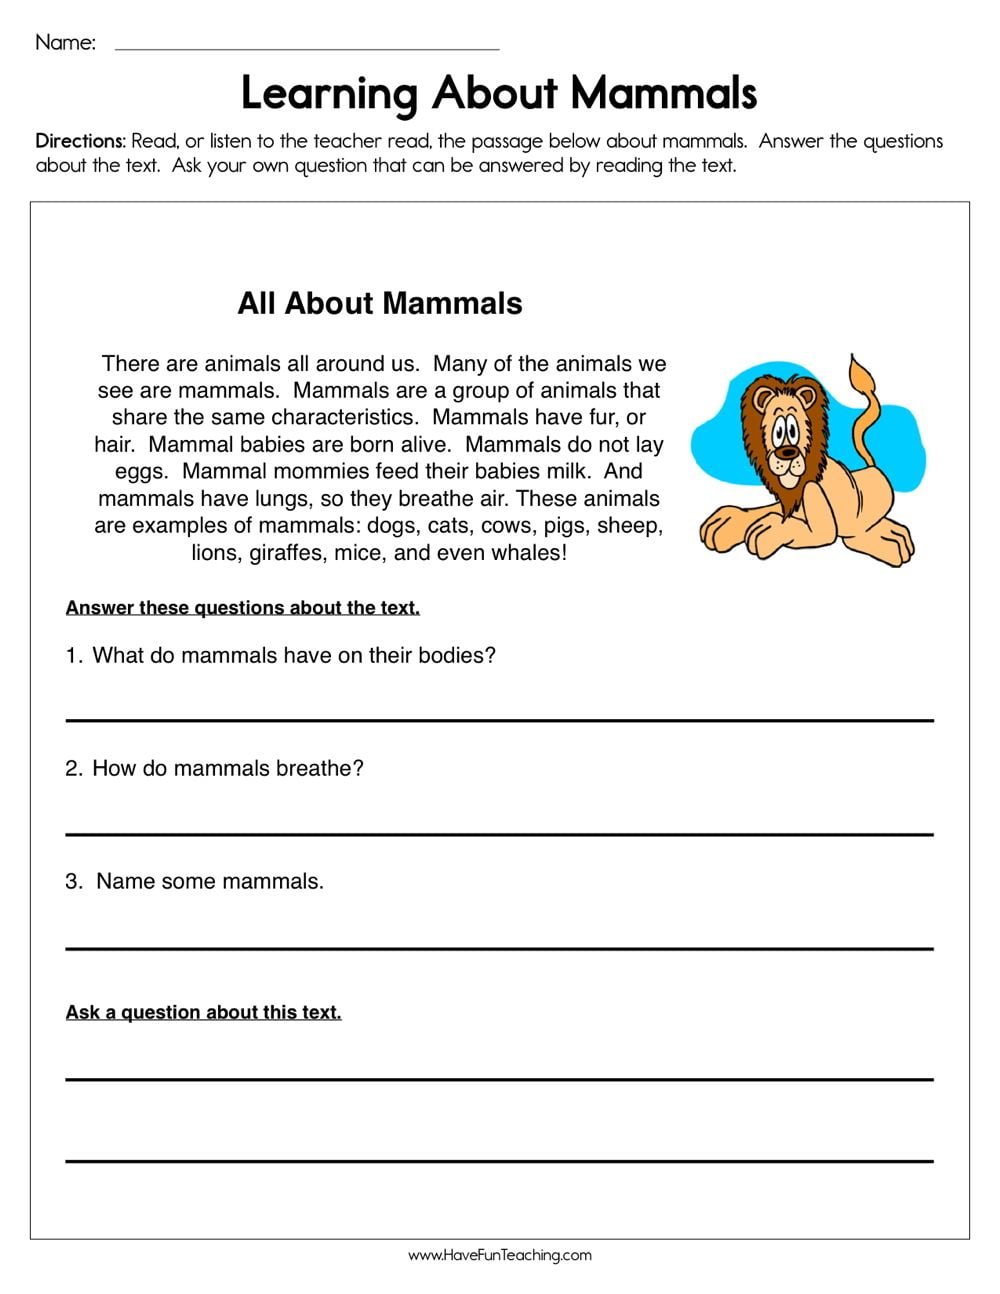 Learning About Mammals Worksheet